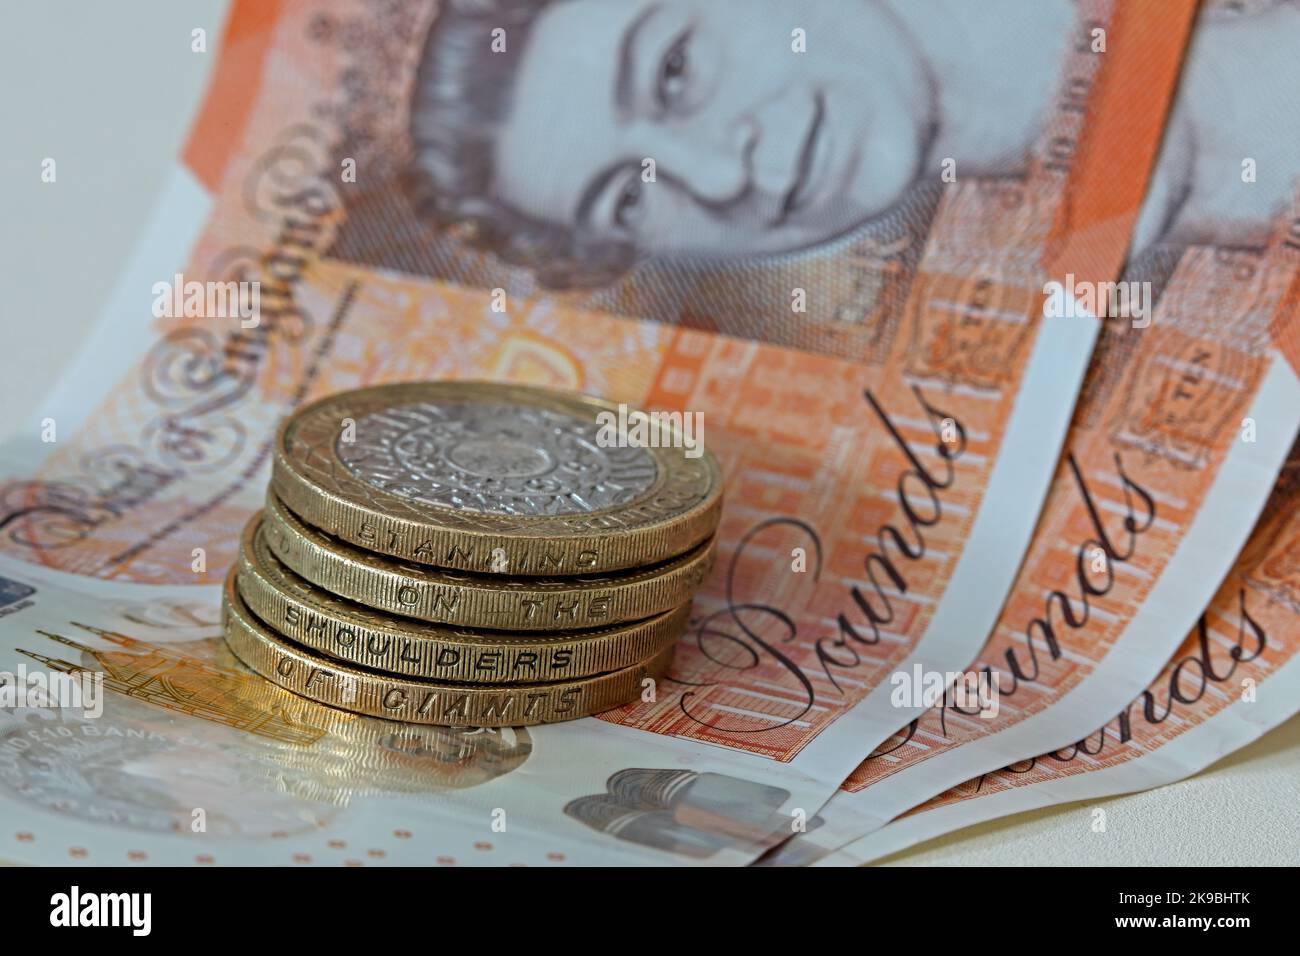 Bank of England, Sterling bank notes, with two pound coins showing inscription, 'Standing on the shoulders of giants". Coins & note hard currency cash Stock Photo